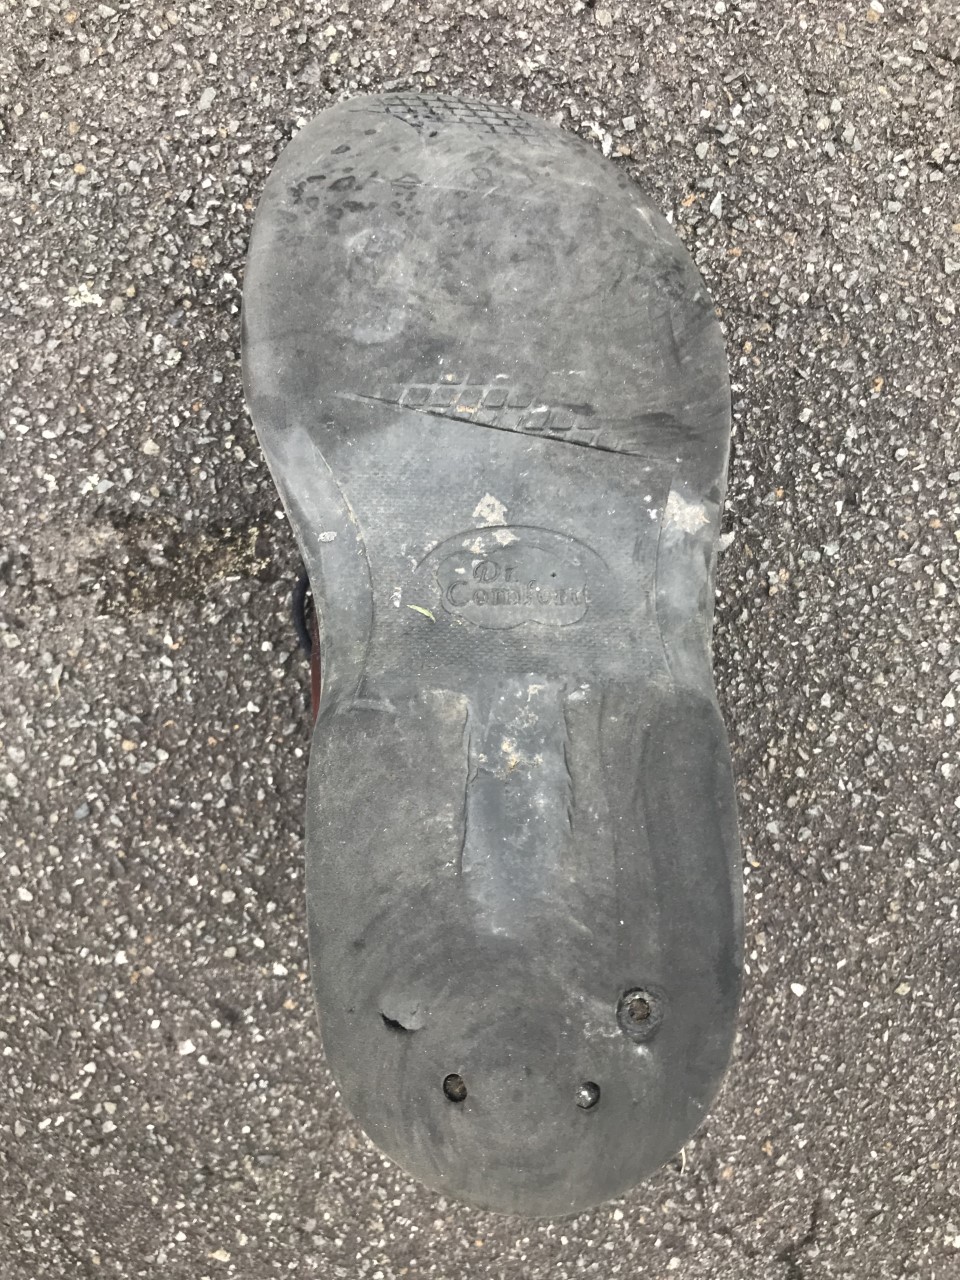 Worn out shoe 2